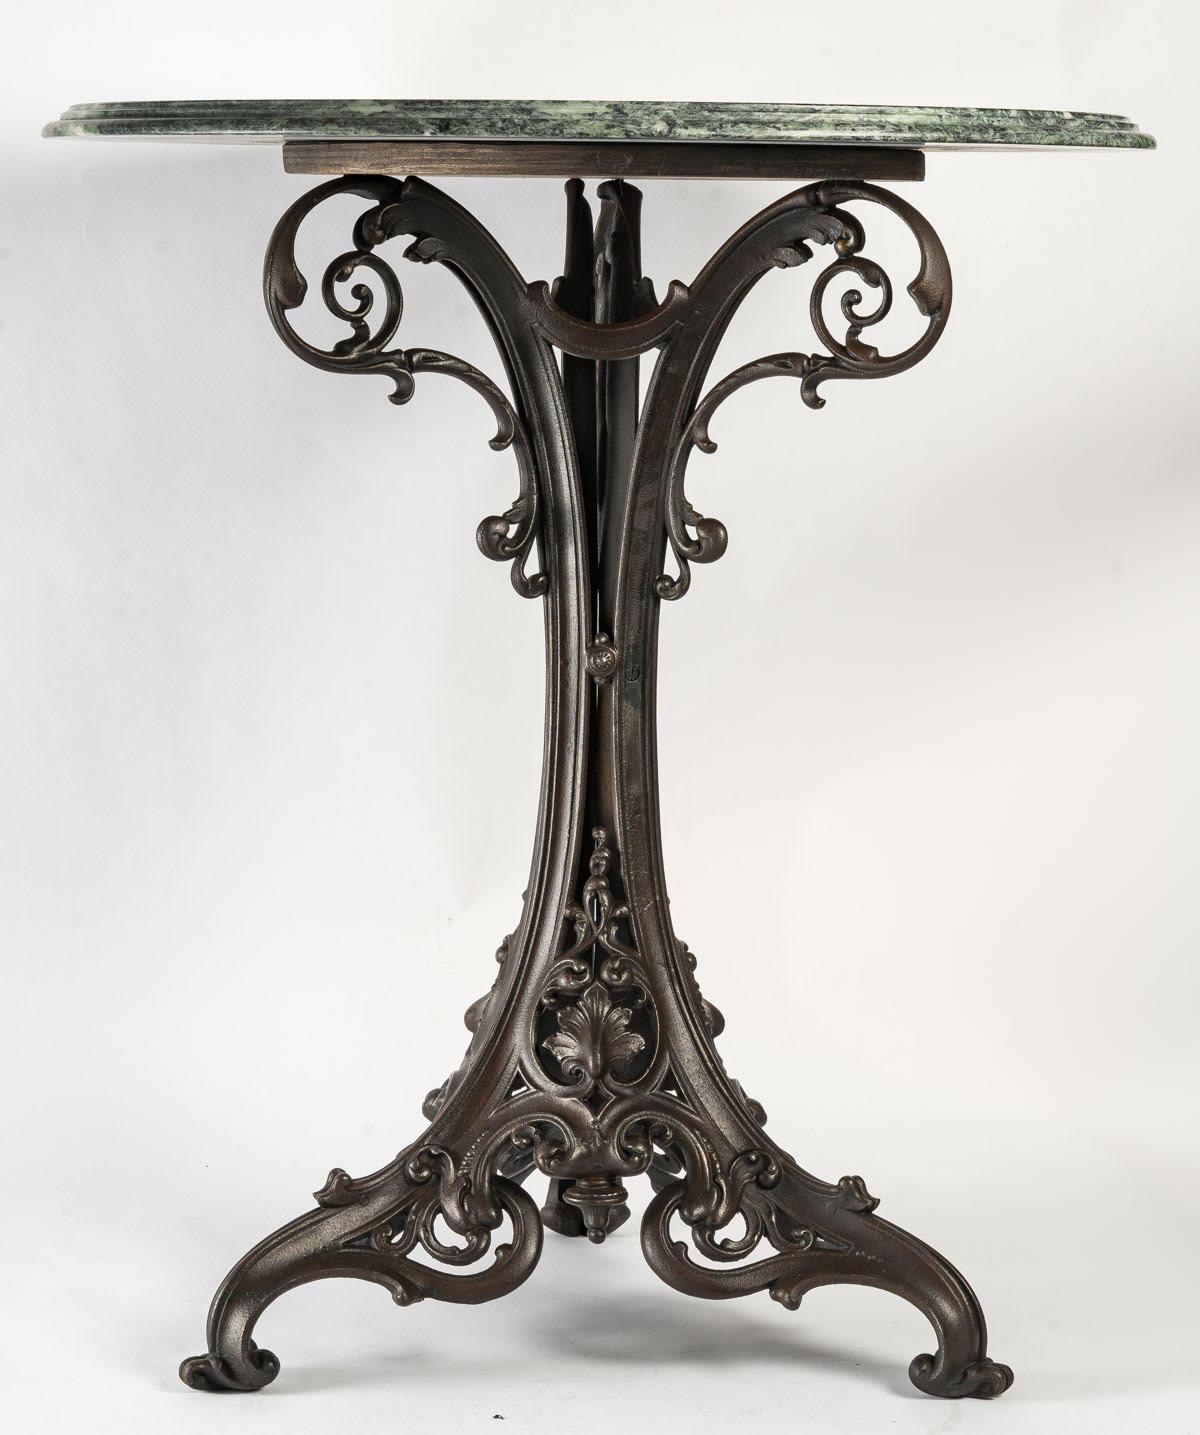 Pedestal table 19th century
Rare iron pedestal table with green marble top.
Measures: H: 81 cm, D: 70 cm.